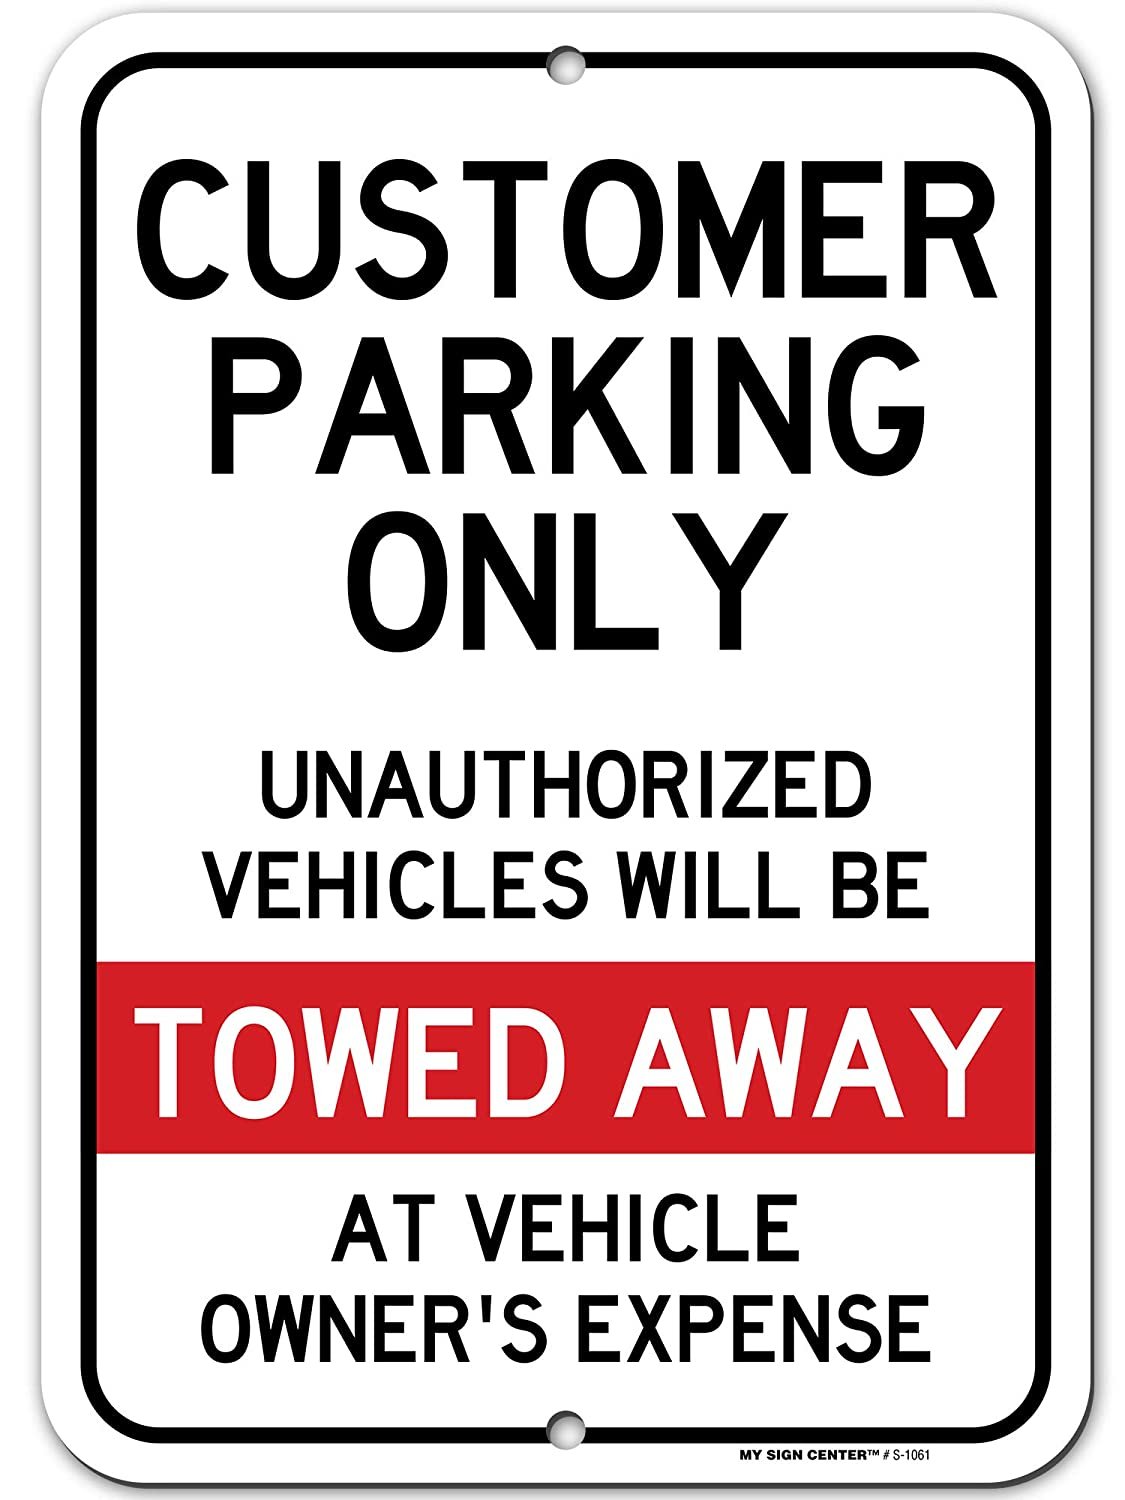 Customer Parking Only Sign Unauthorized Vehicles Will Be Towed